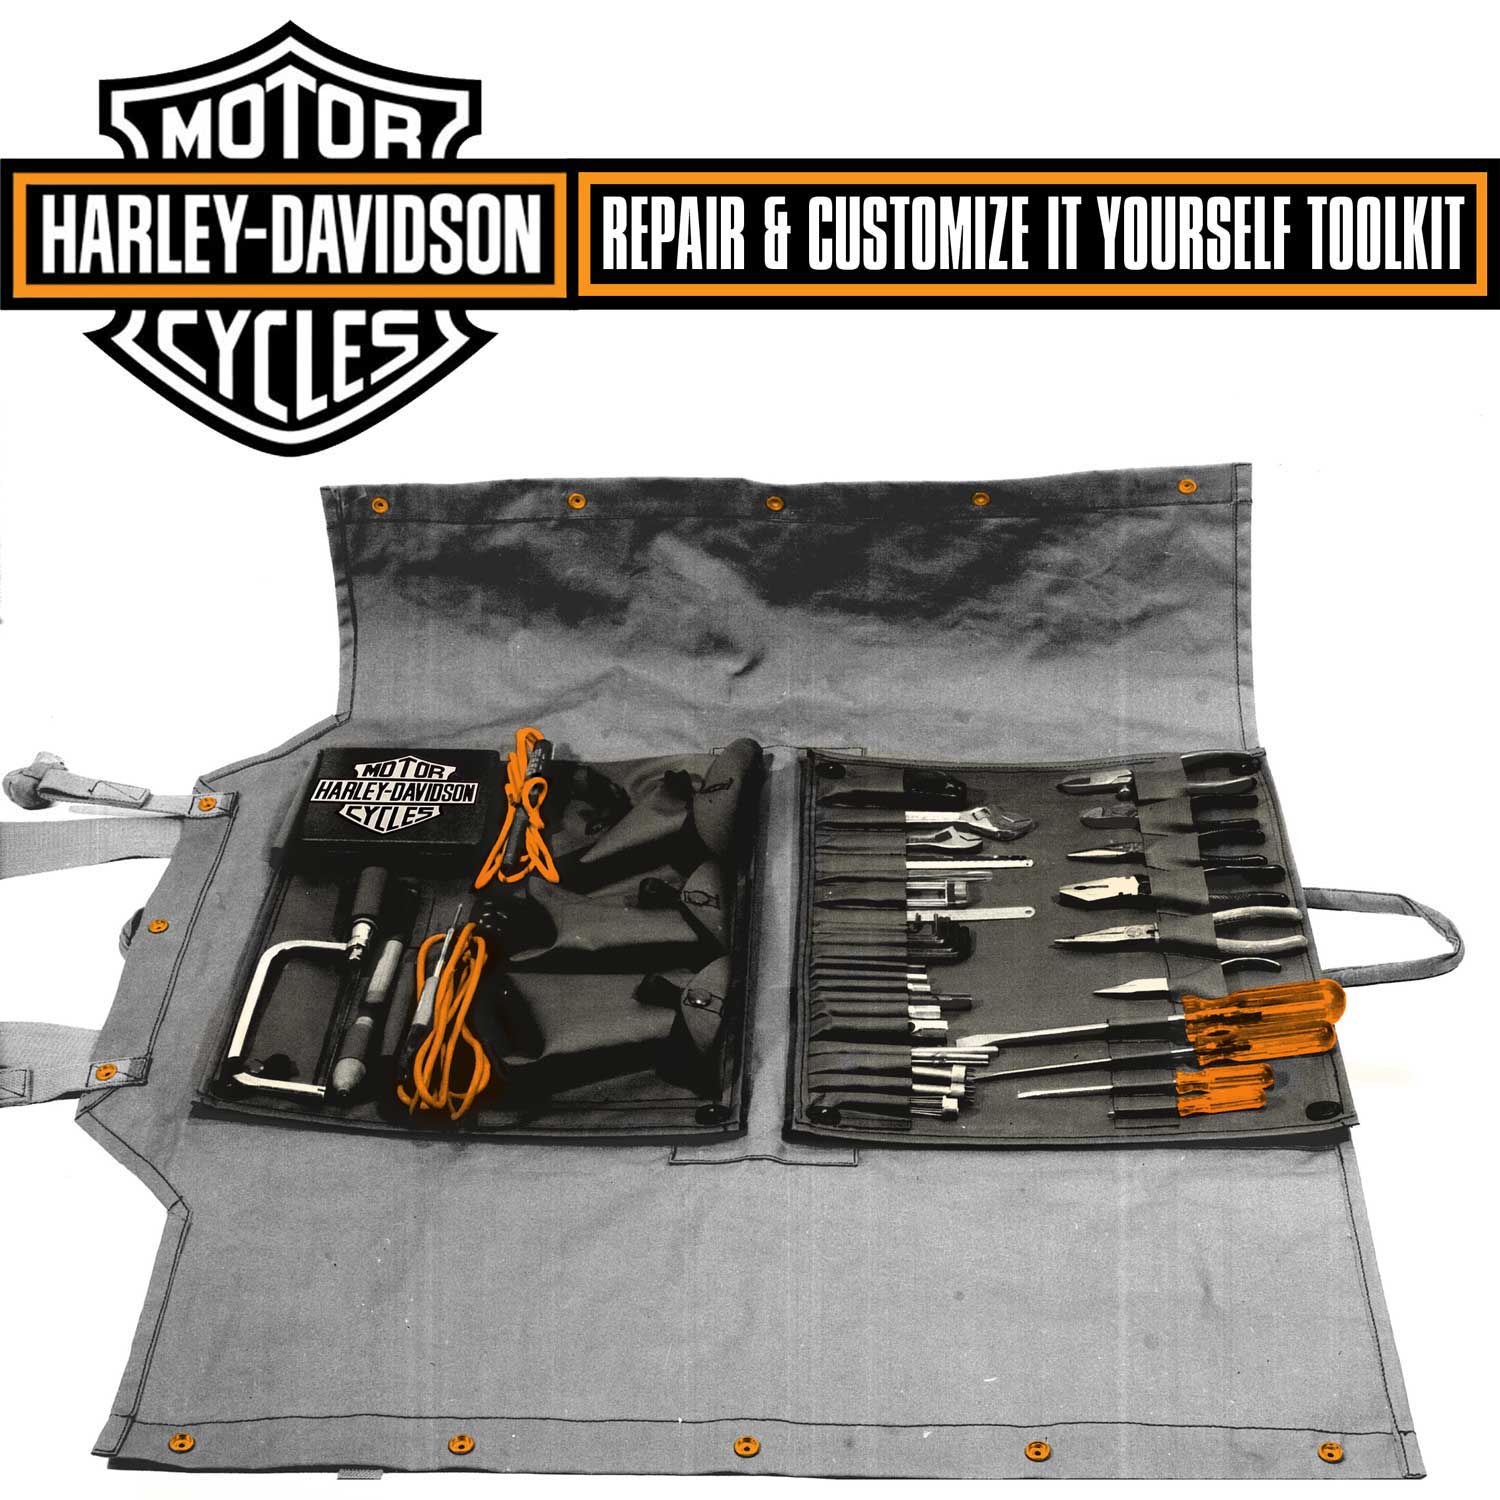 Gift Idea Pit Posse Harley Davidson Folding Tool Set 12 in 1 SAE Motorcycle Tool Harley Davidson Tools and Accessories 